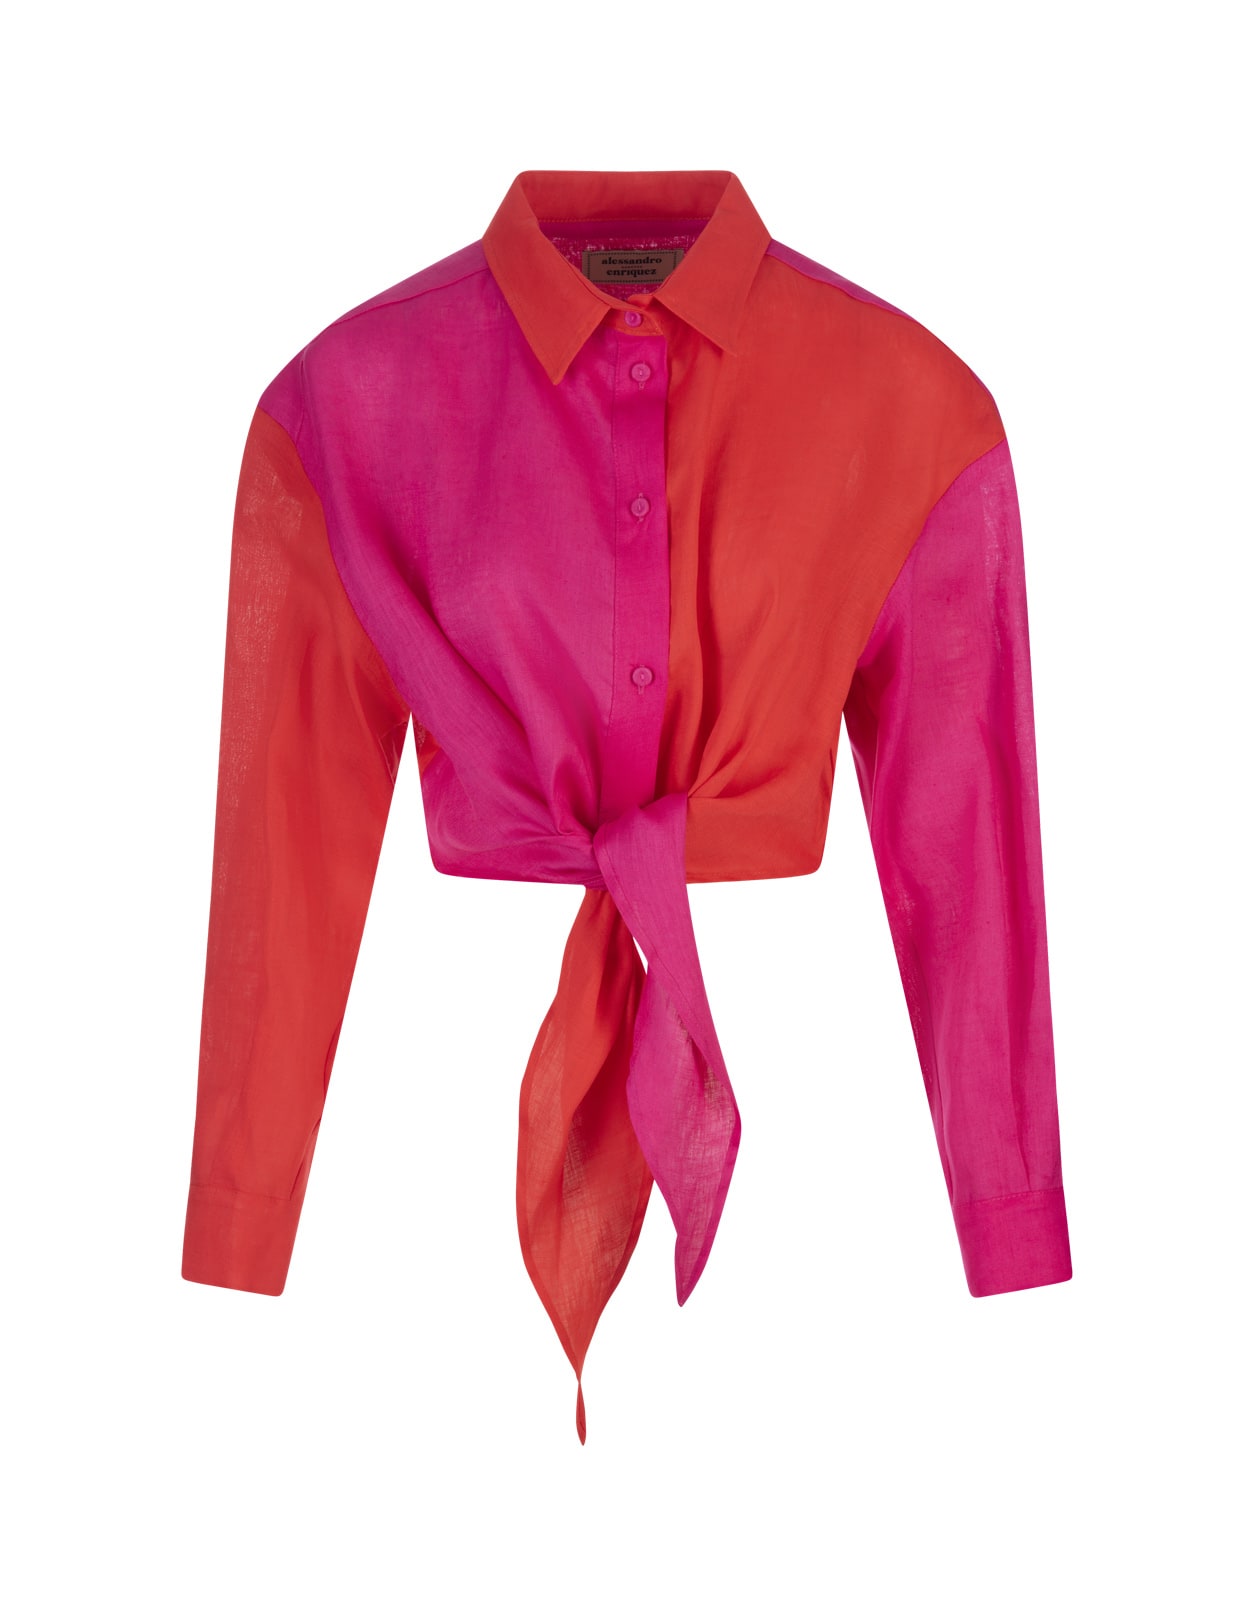 Red And Fuchsia Short Shirt With Knot